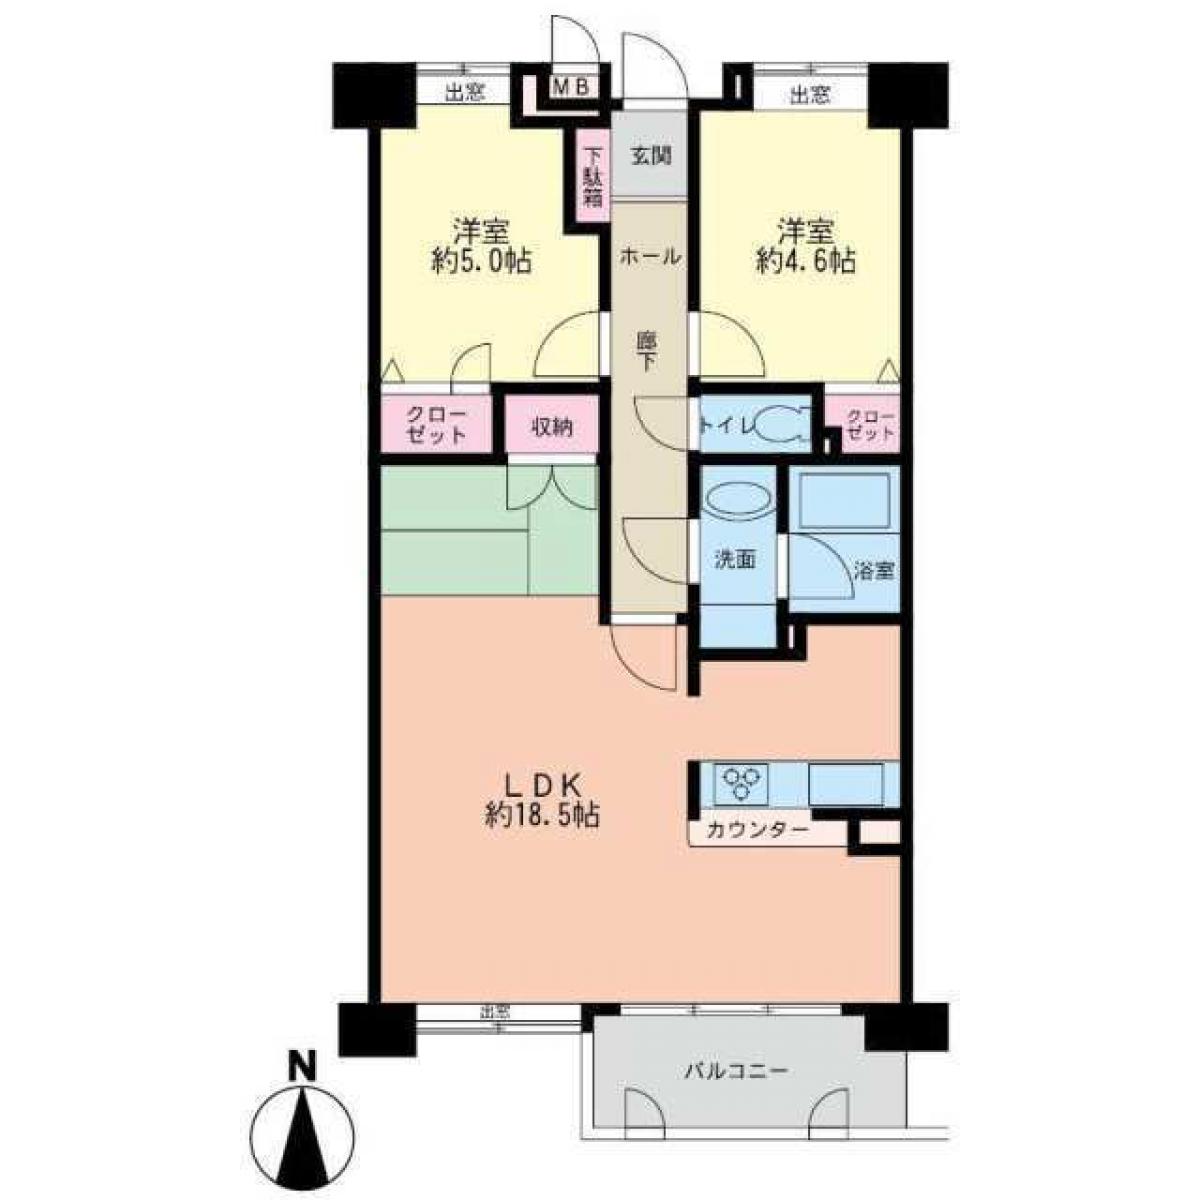 Picture of Apartment For Sale in Itoshima Shi, Fukuoka, Japan